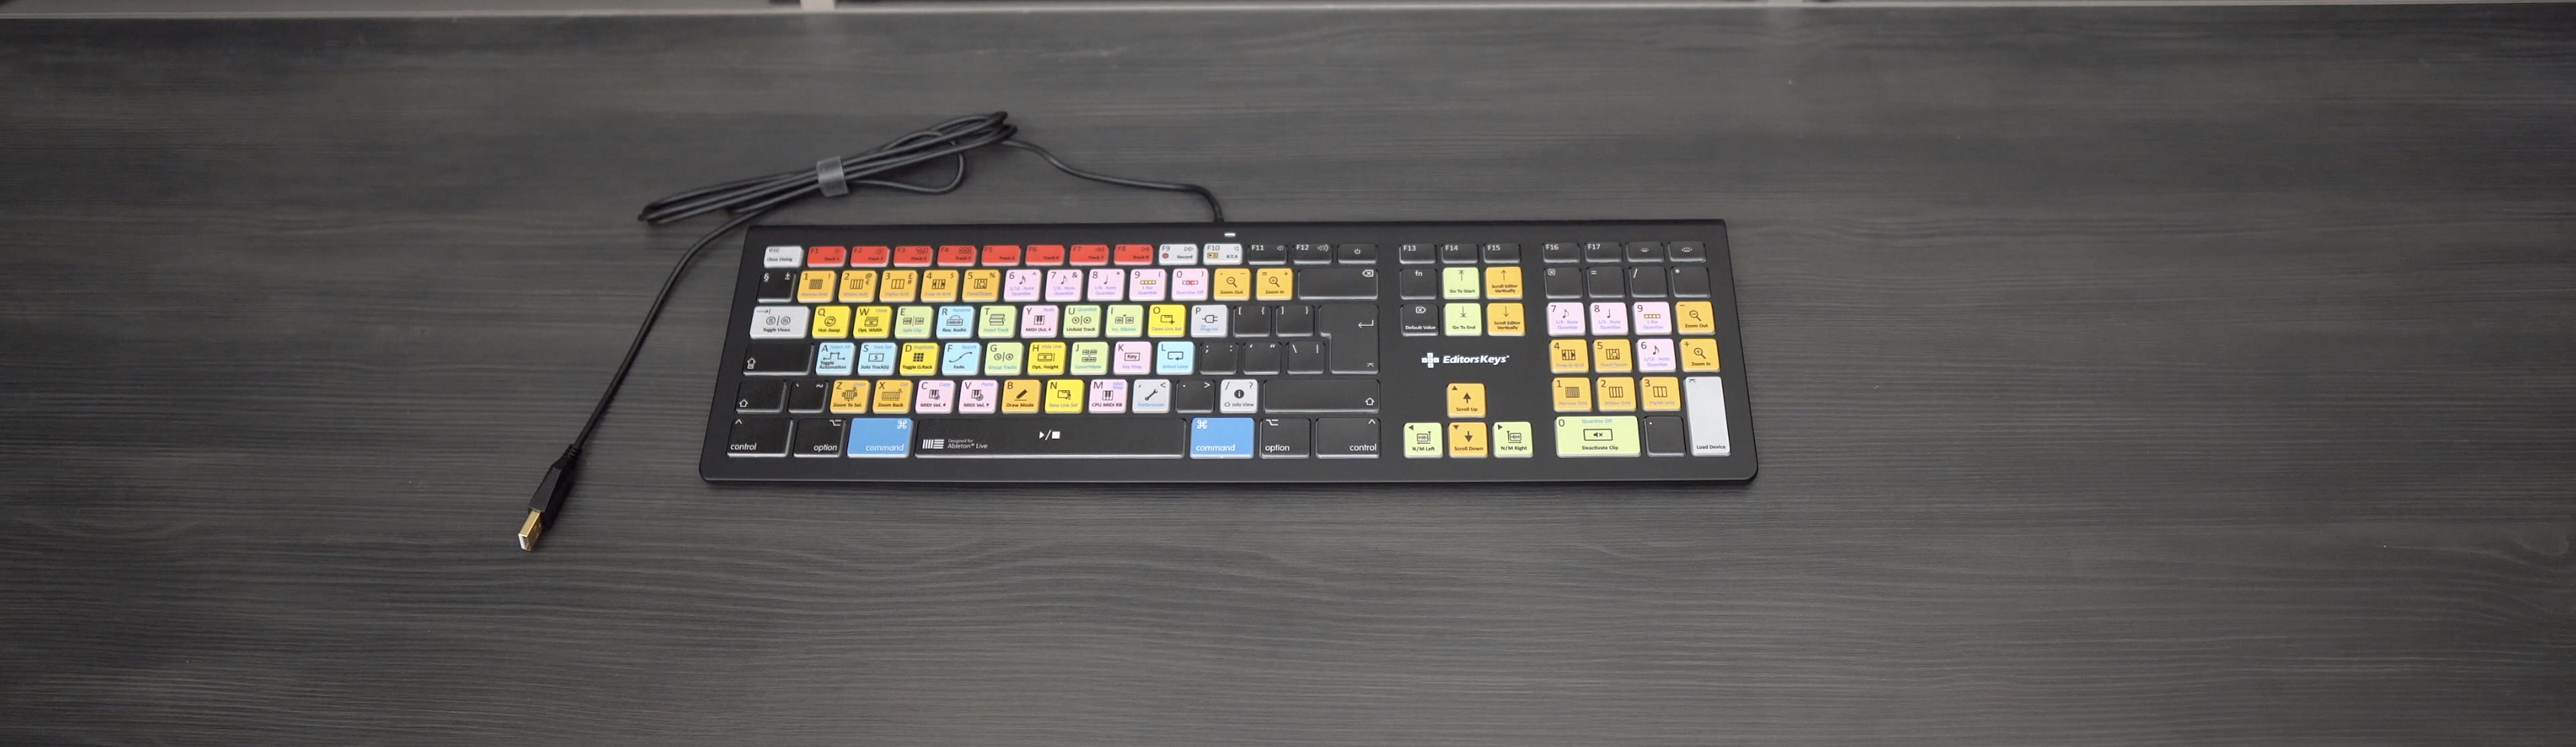 The Best Ableton Live Keyboard for Mac or PC by EditorsKeys 